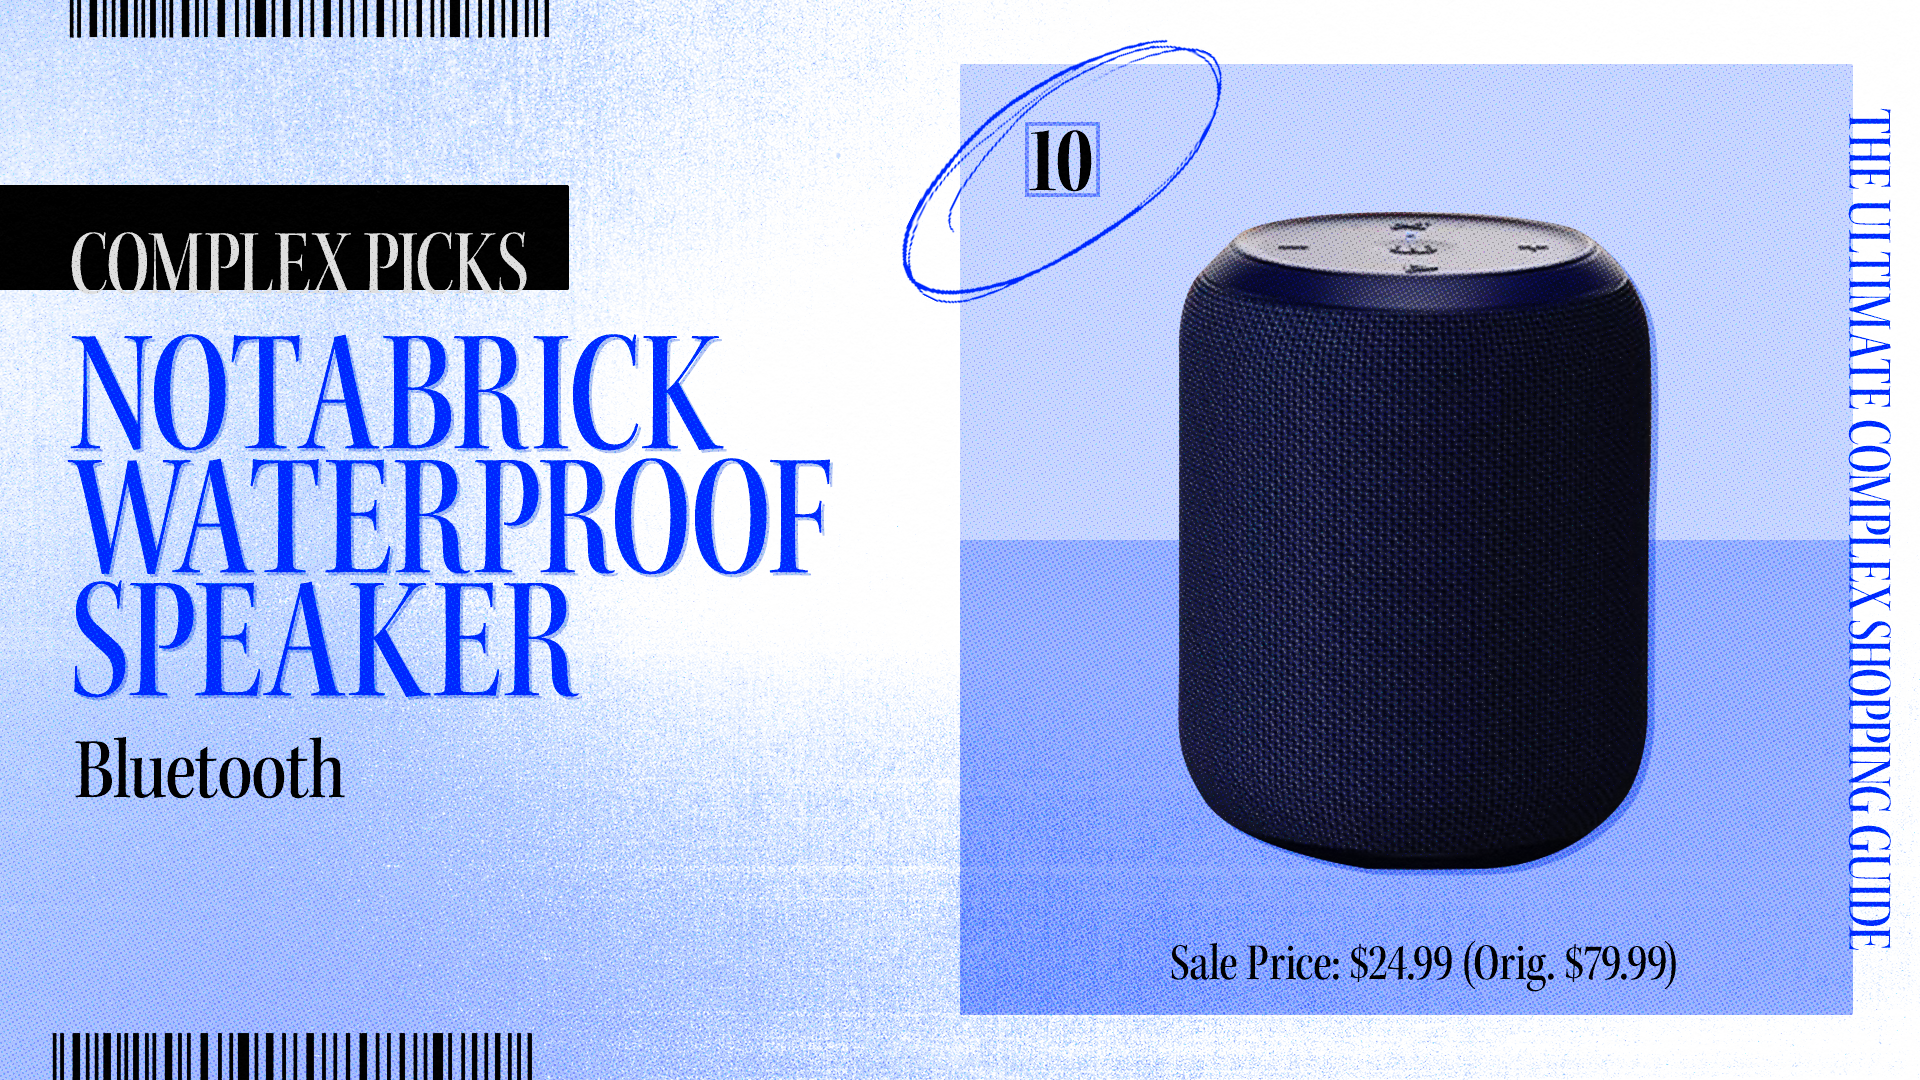 Image of the Ultimate Complex Shopping Guide featuring a Notabrick waterproof Bluetooth speaker. It is listed as a top pick and on sale for $24.99 (originally $79.99)